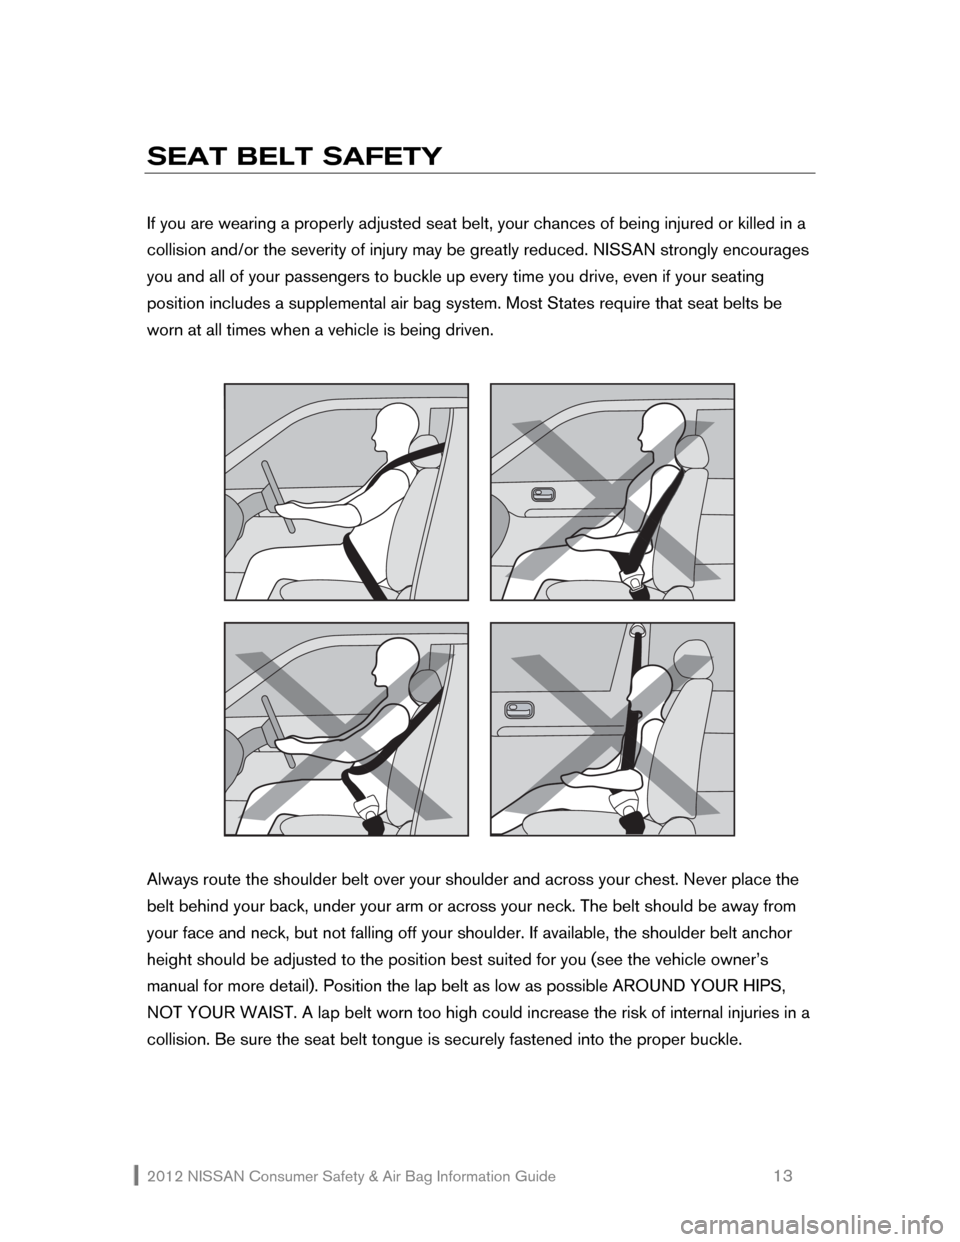 NISSAN XTERRA 2012 N50 / 2.G Consumer Safety Air Bag Information Guide 2012 NISSAN Consumer Safety & Air Bag Information Guide                                                   13 
SEAT BELT SAFETY 
 
If you are wearing a properly adjusted seat belt, your chances of bein